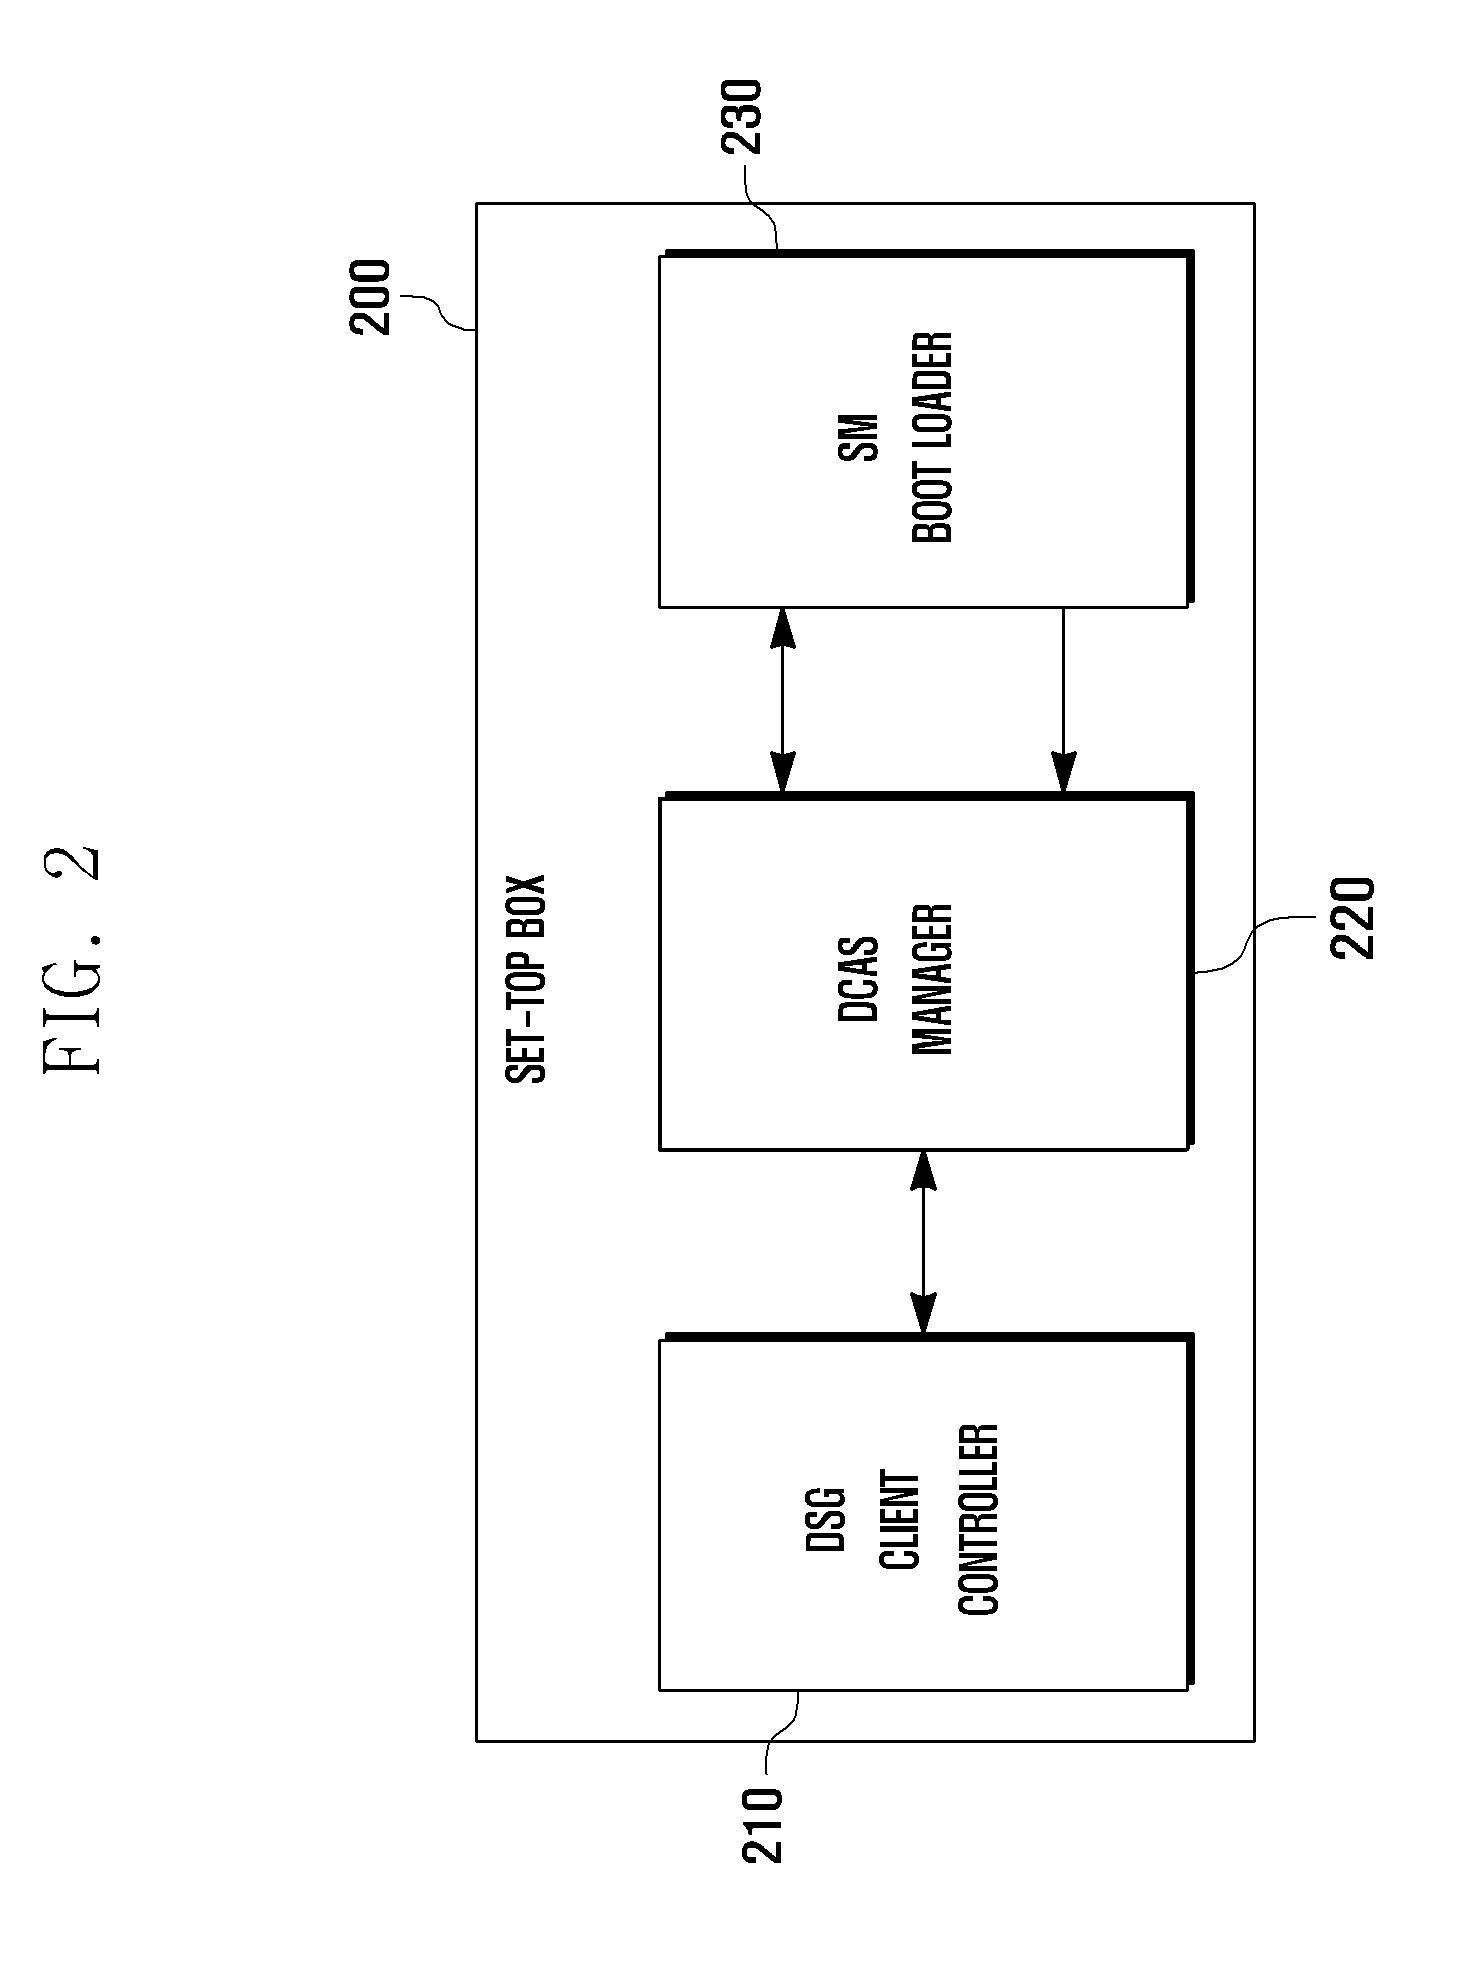 Method and system for identifying set-top box in download conditional access system